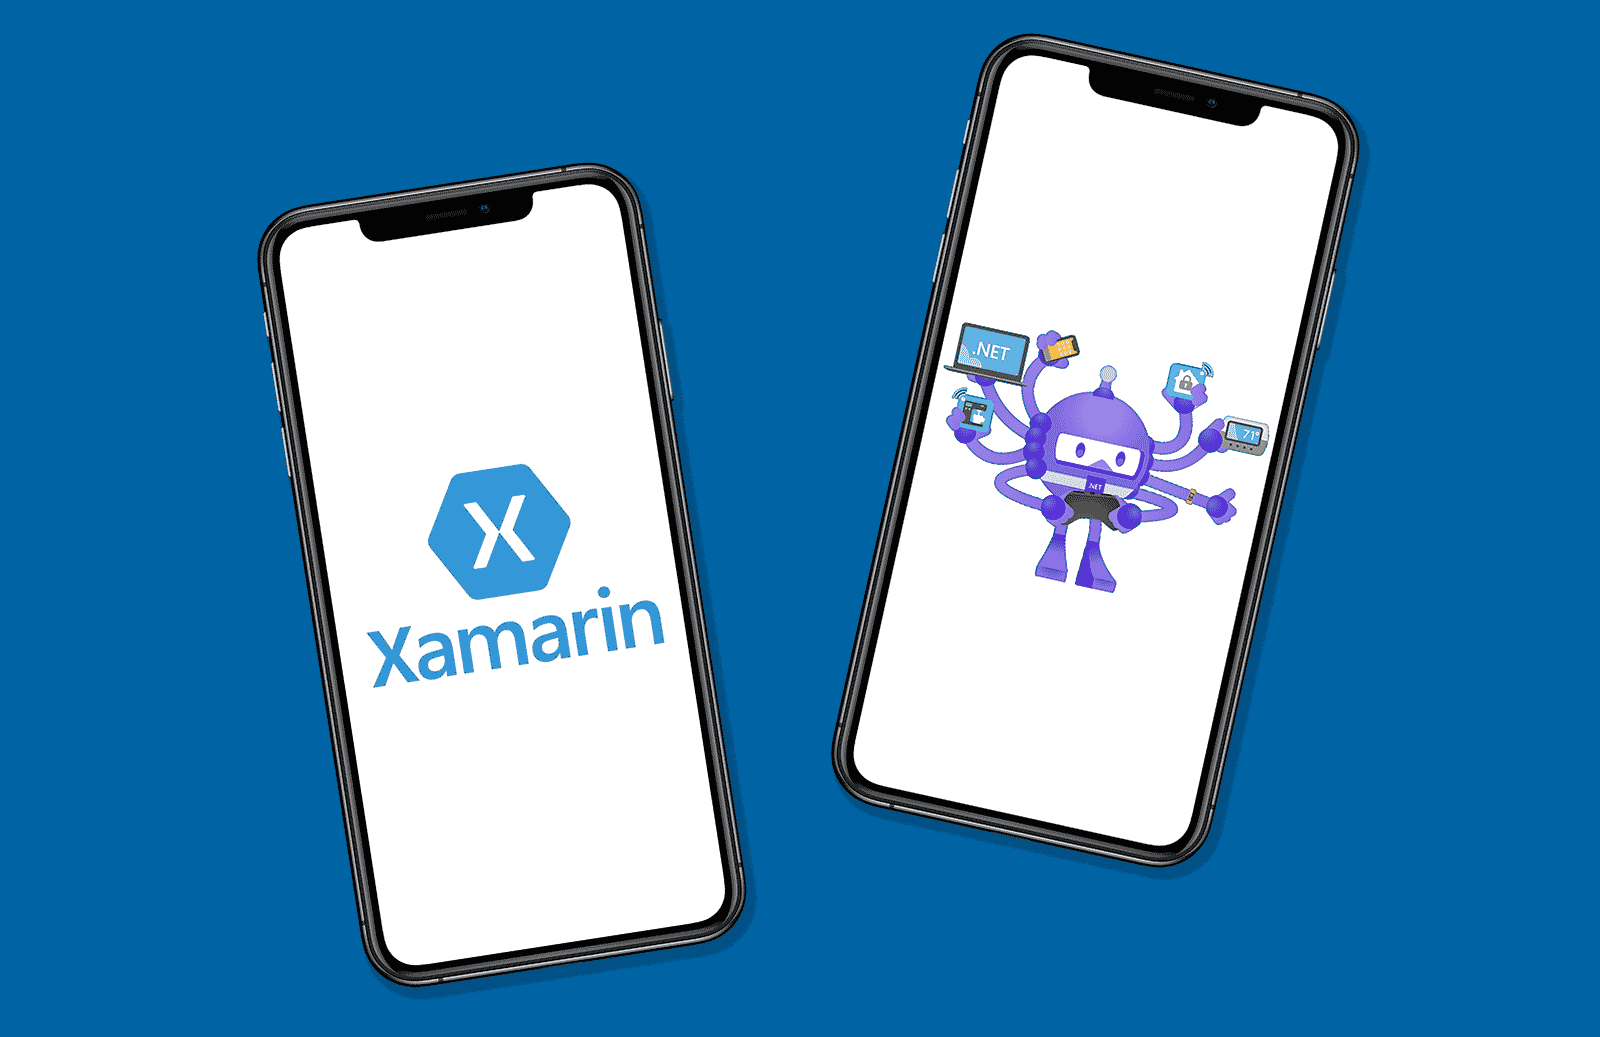 MIGRATING APPLICATIONS FROM XAMARIN TO .NET MAUI